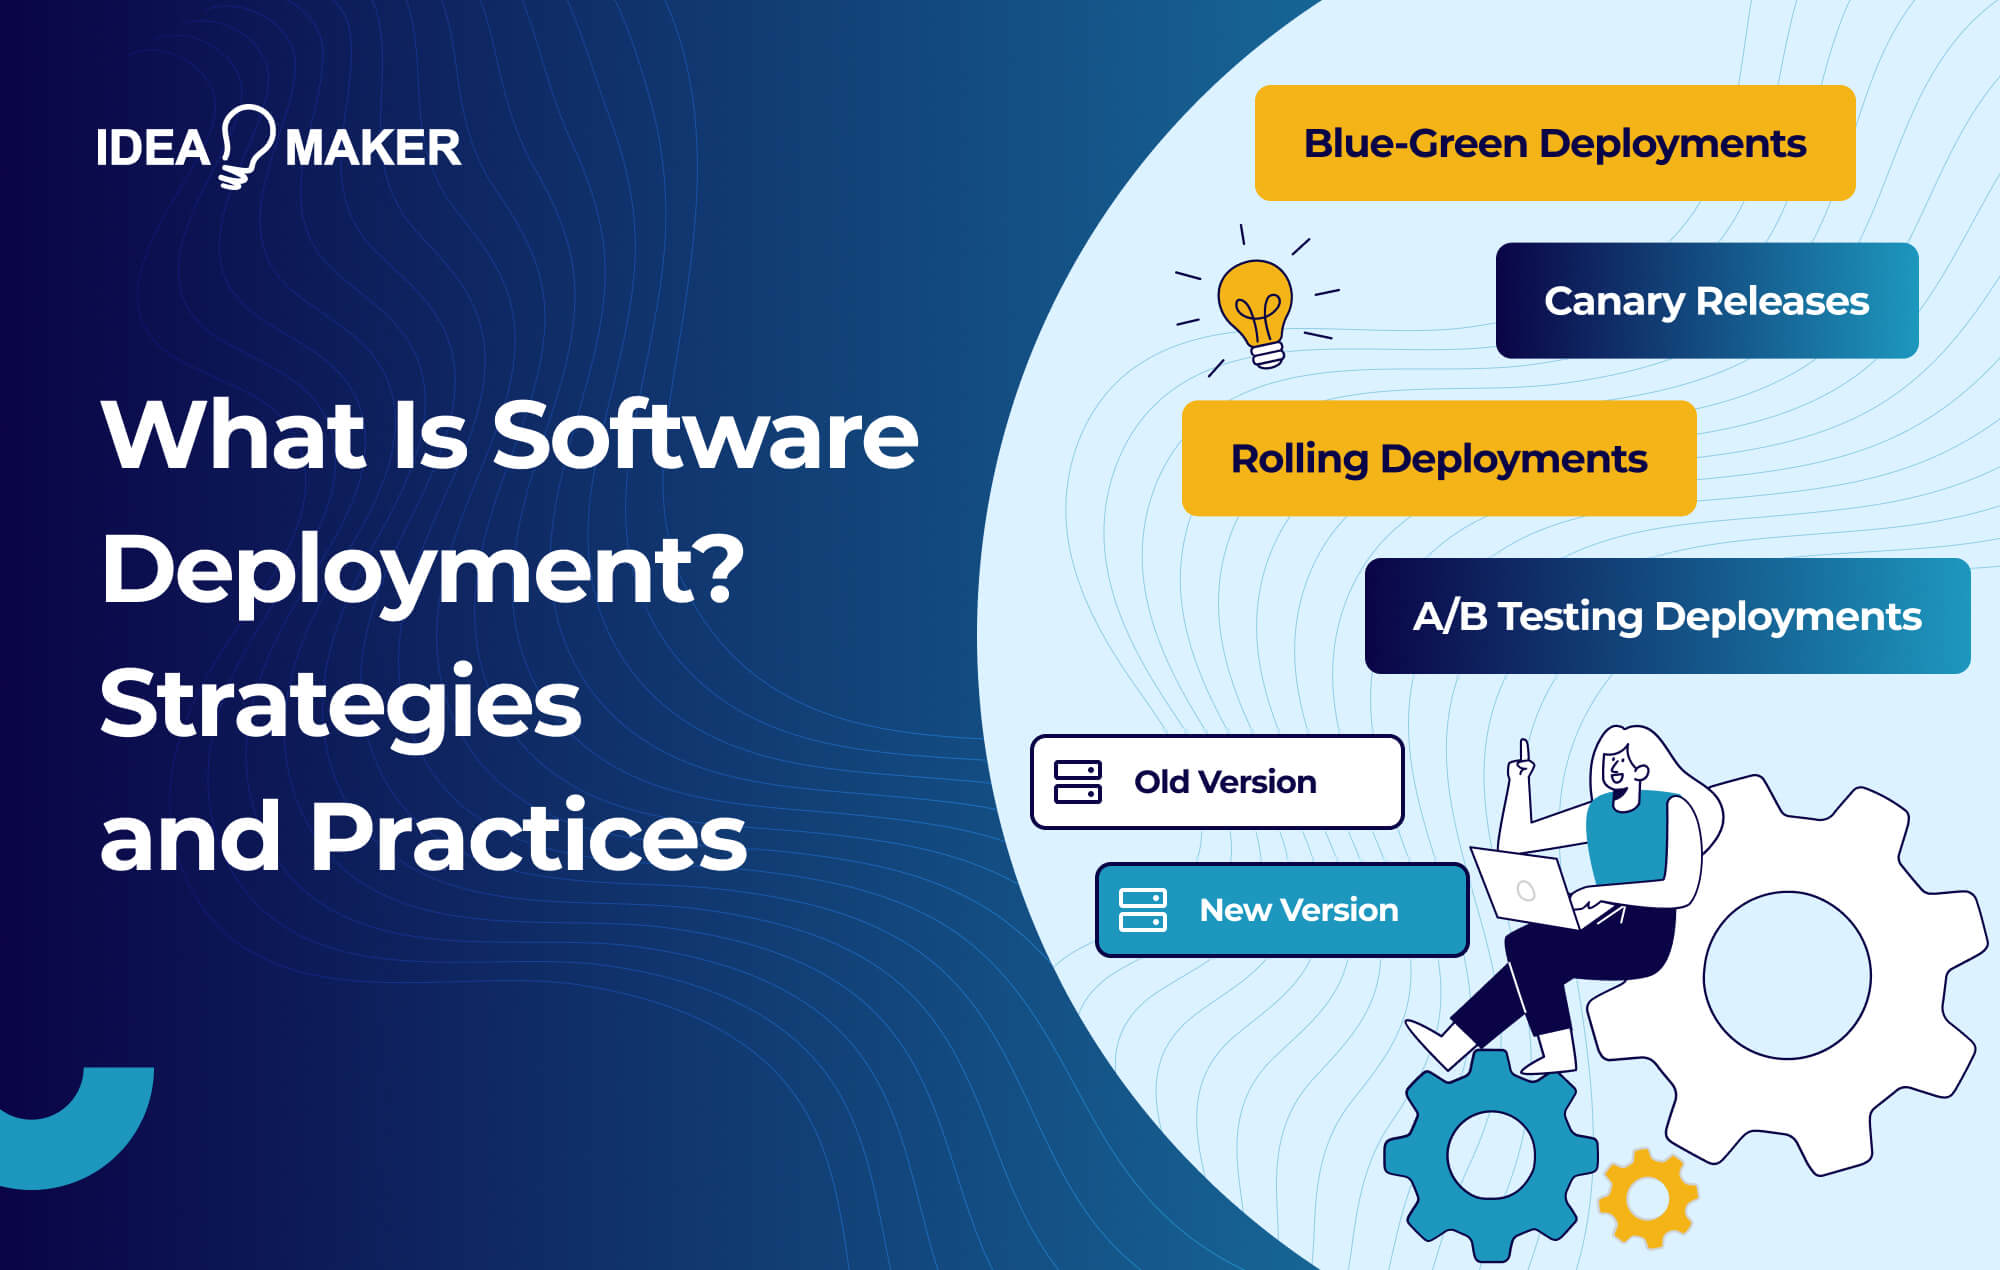 Ideamaker - What Is Software Deployment_ Strategies and Practices